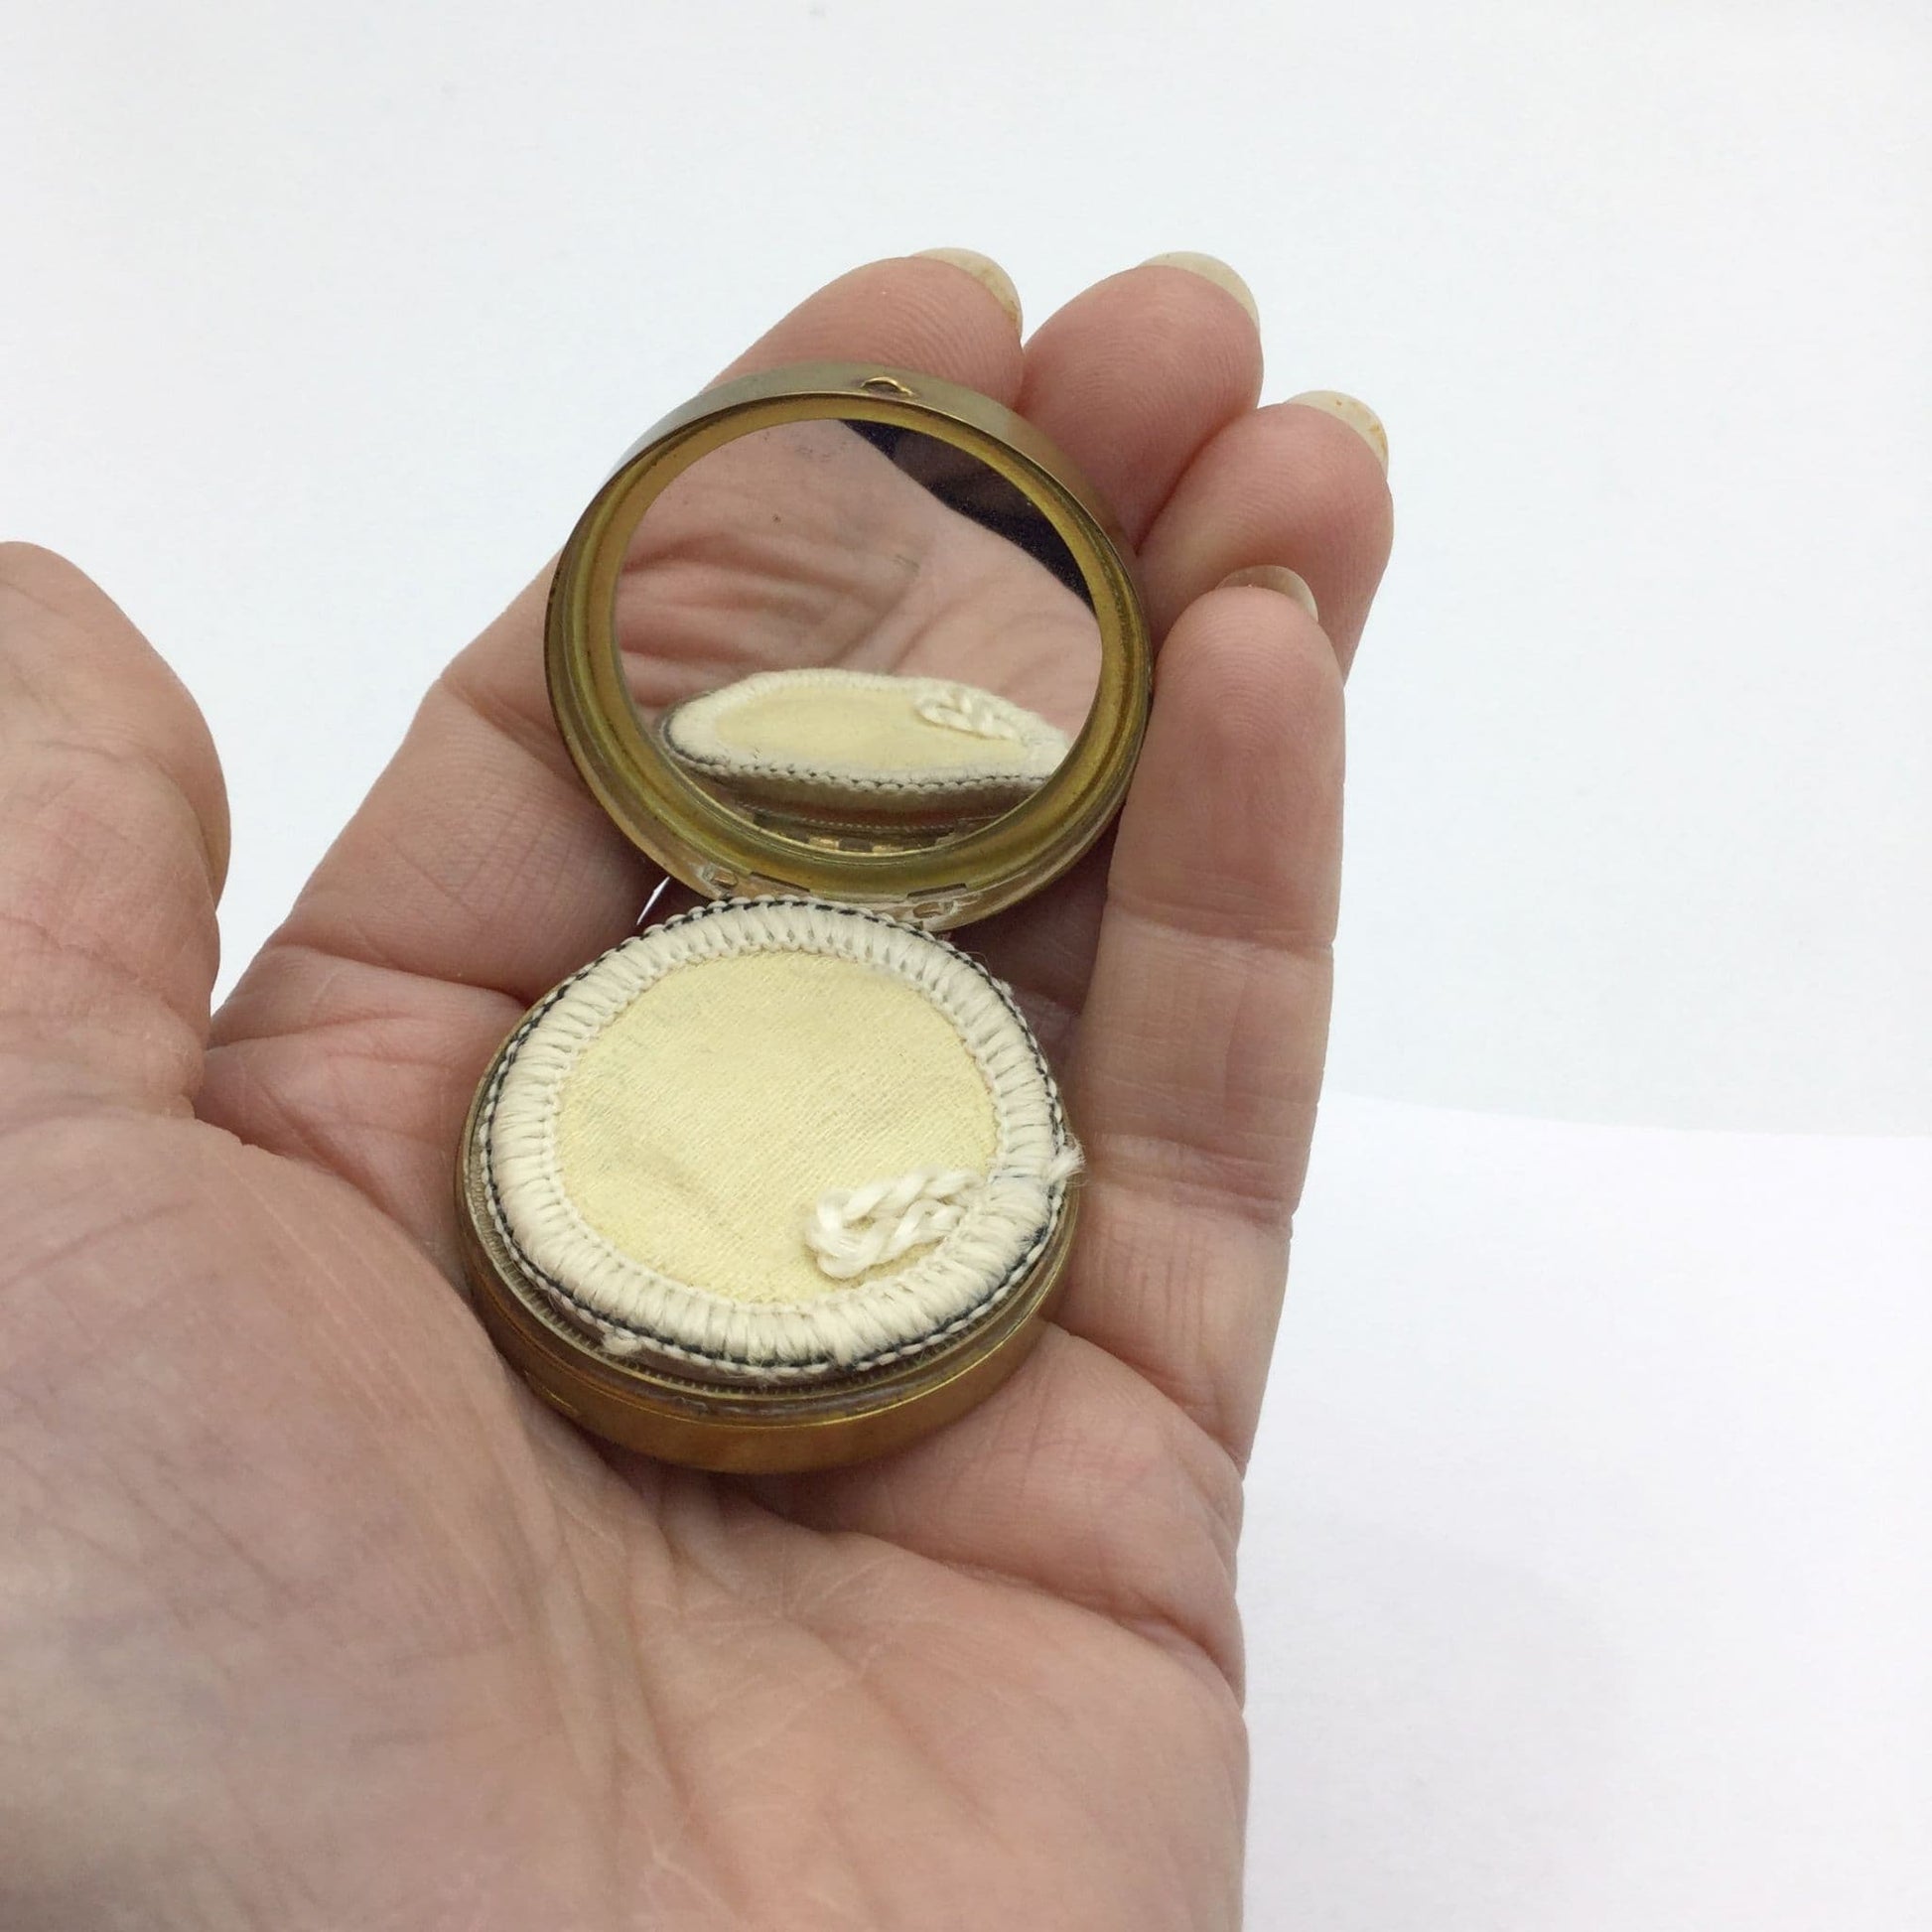 small powder compact showing a clear mirror and an unused applicator held in a hand